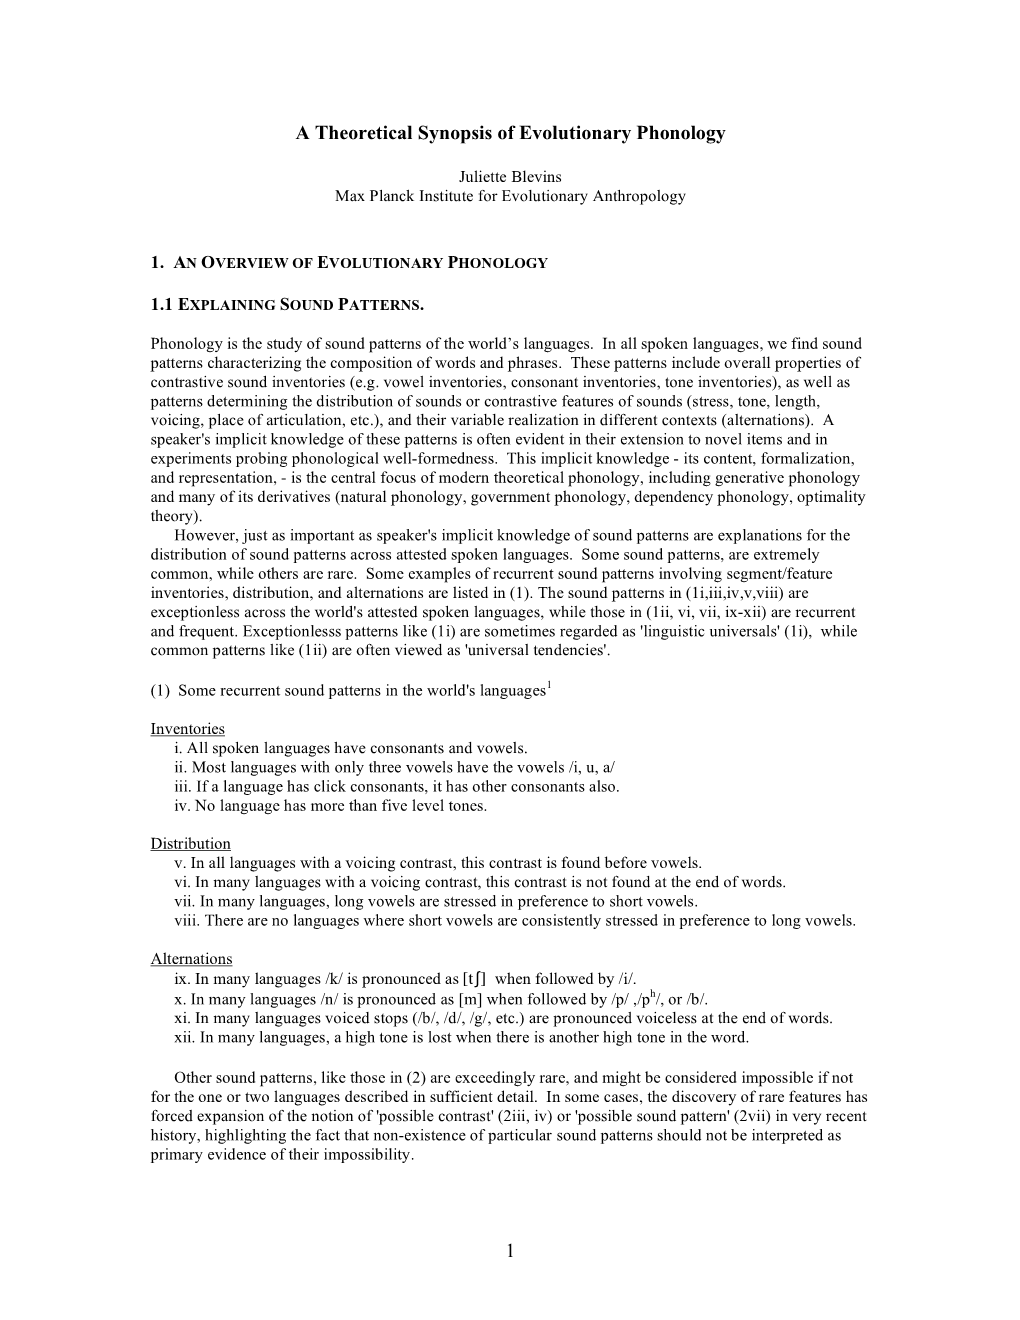 1 a Theoretical Synopsis of Evolutionary Phonology